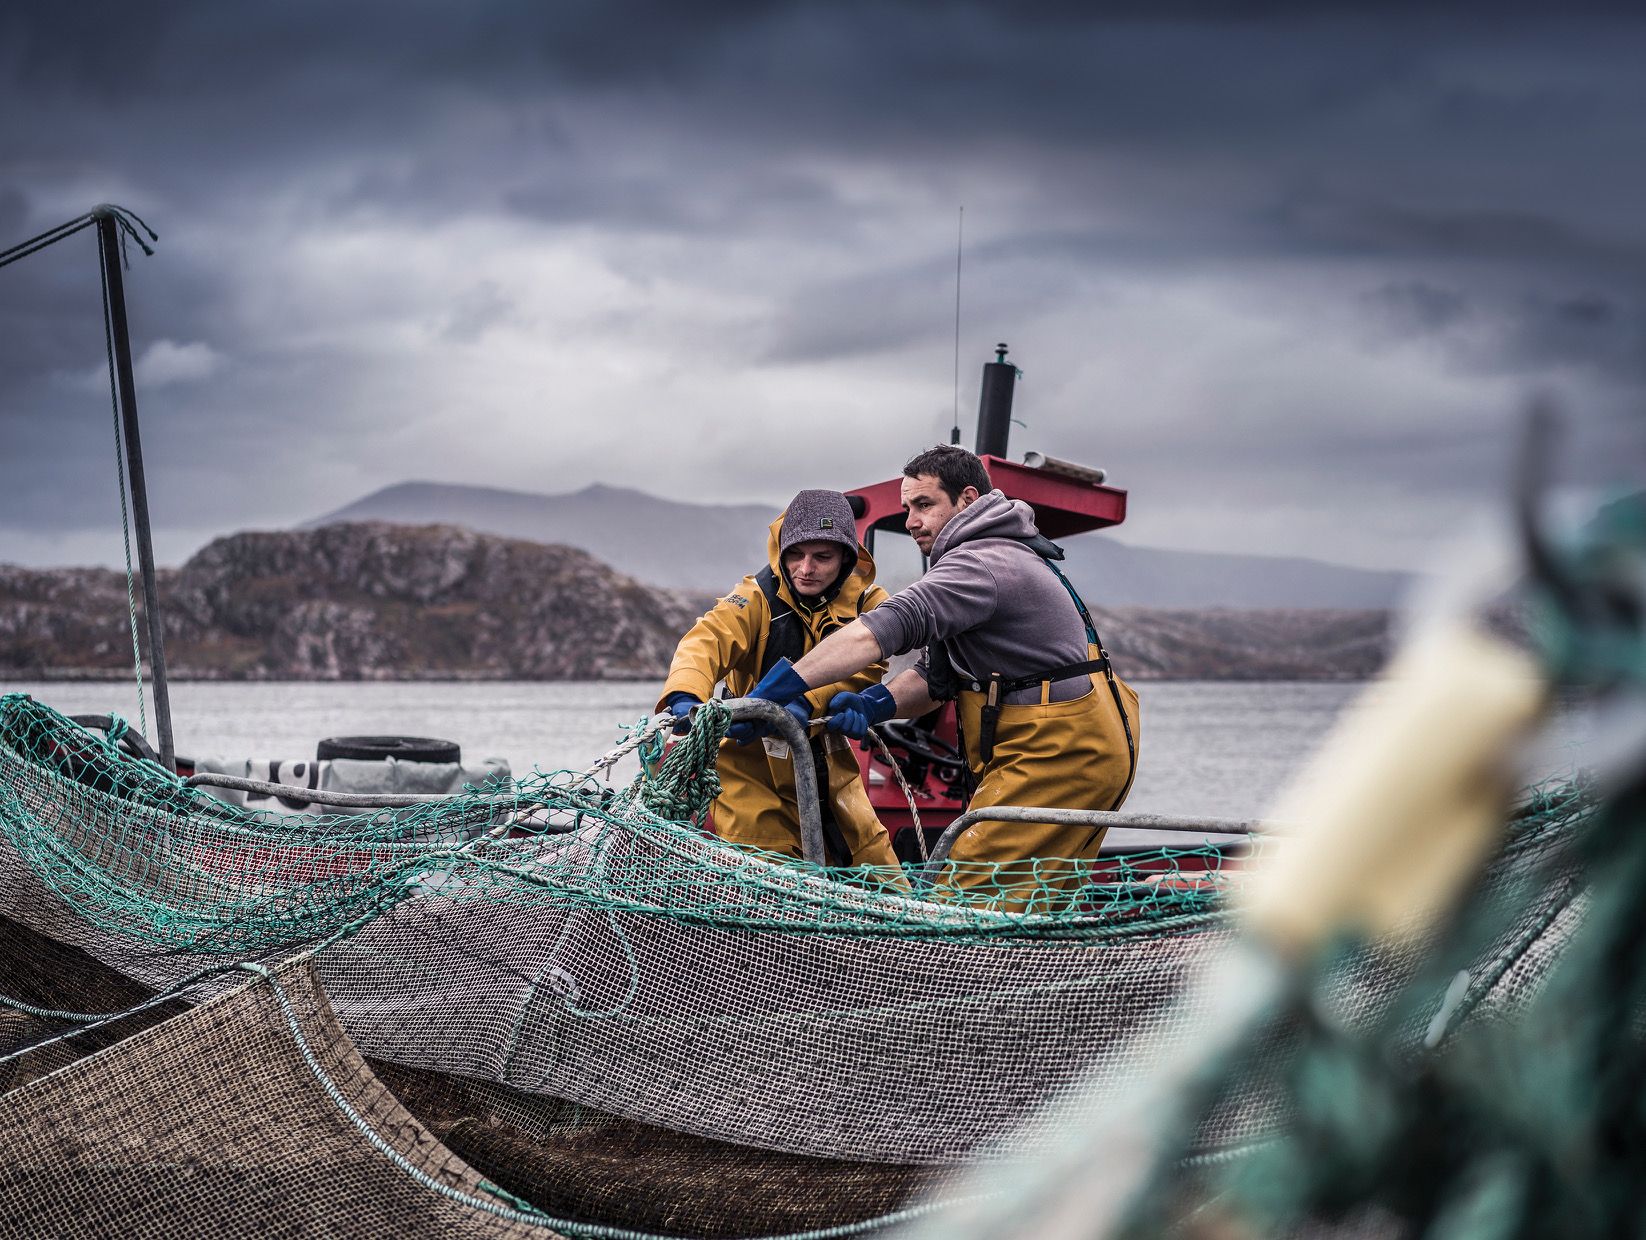 Loch Duart marks 20 years of salmon farming this year